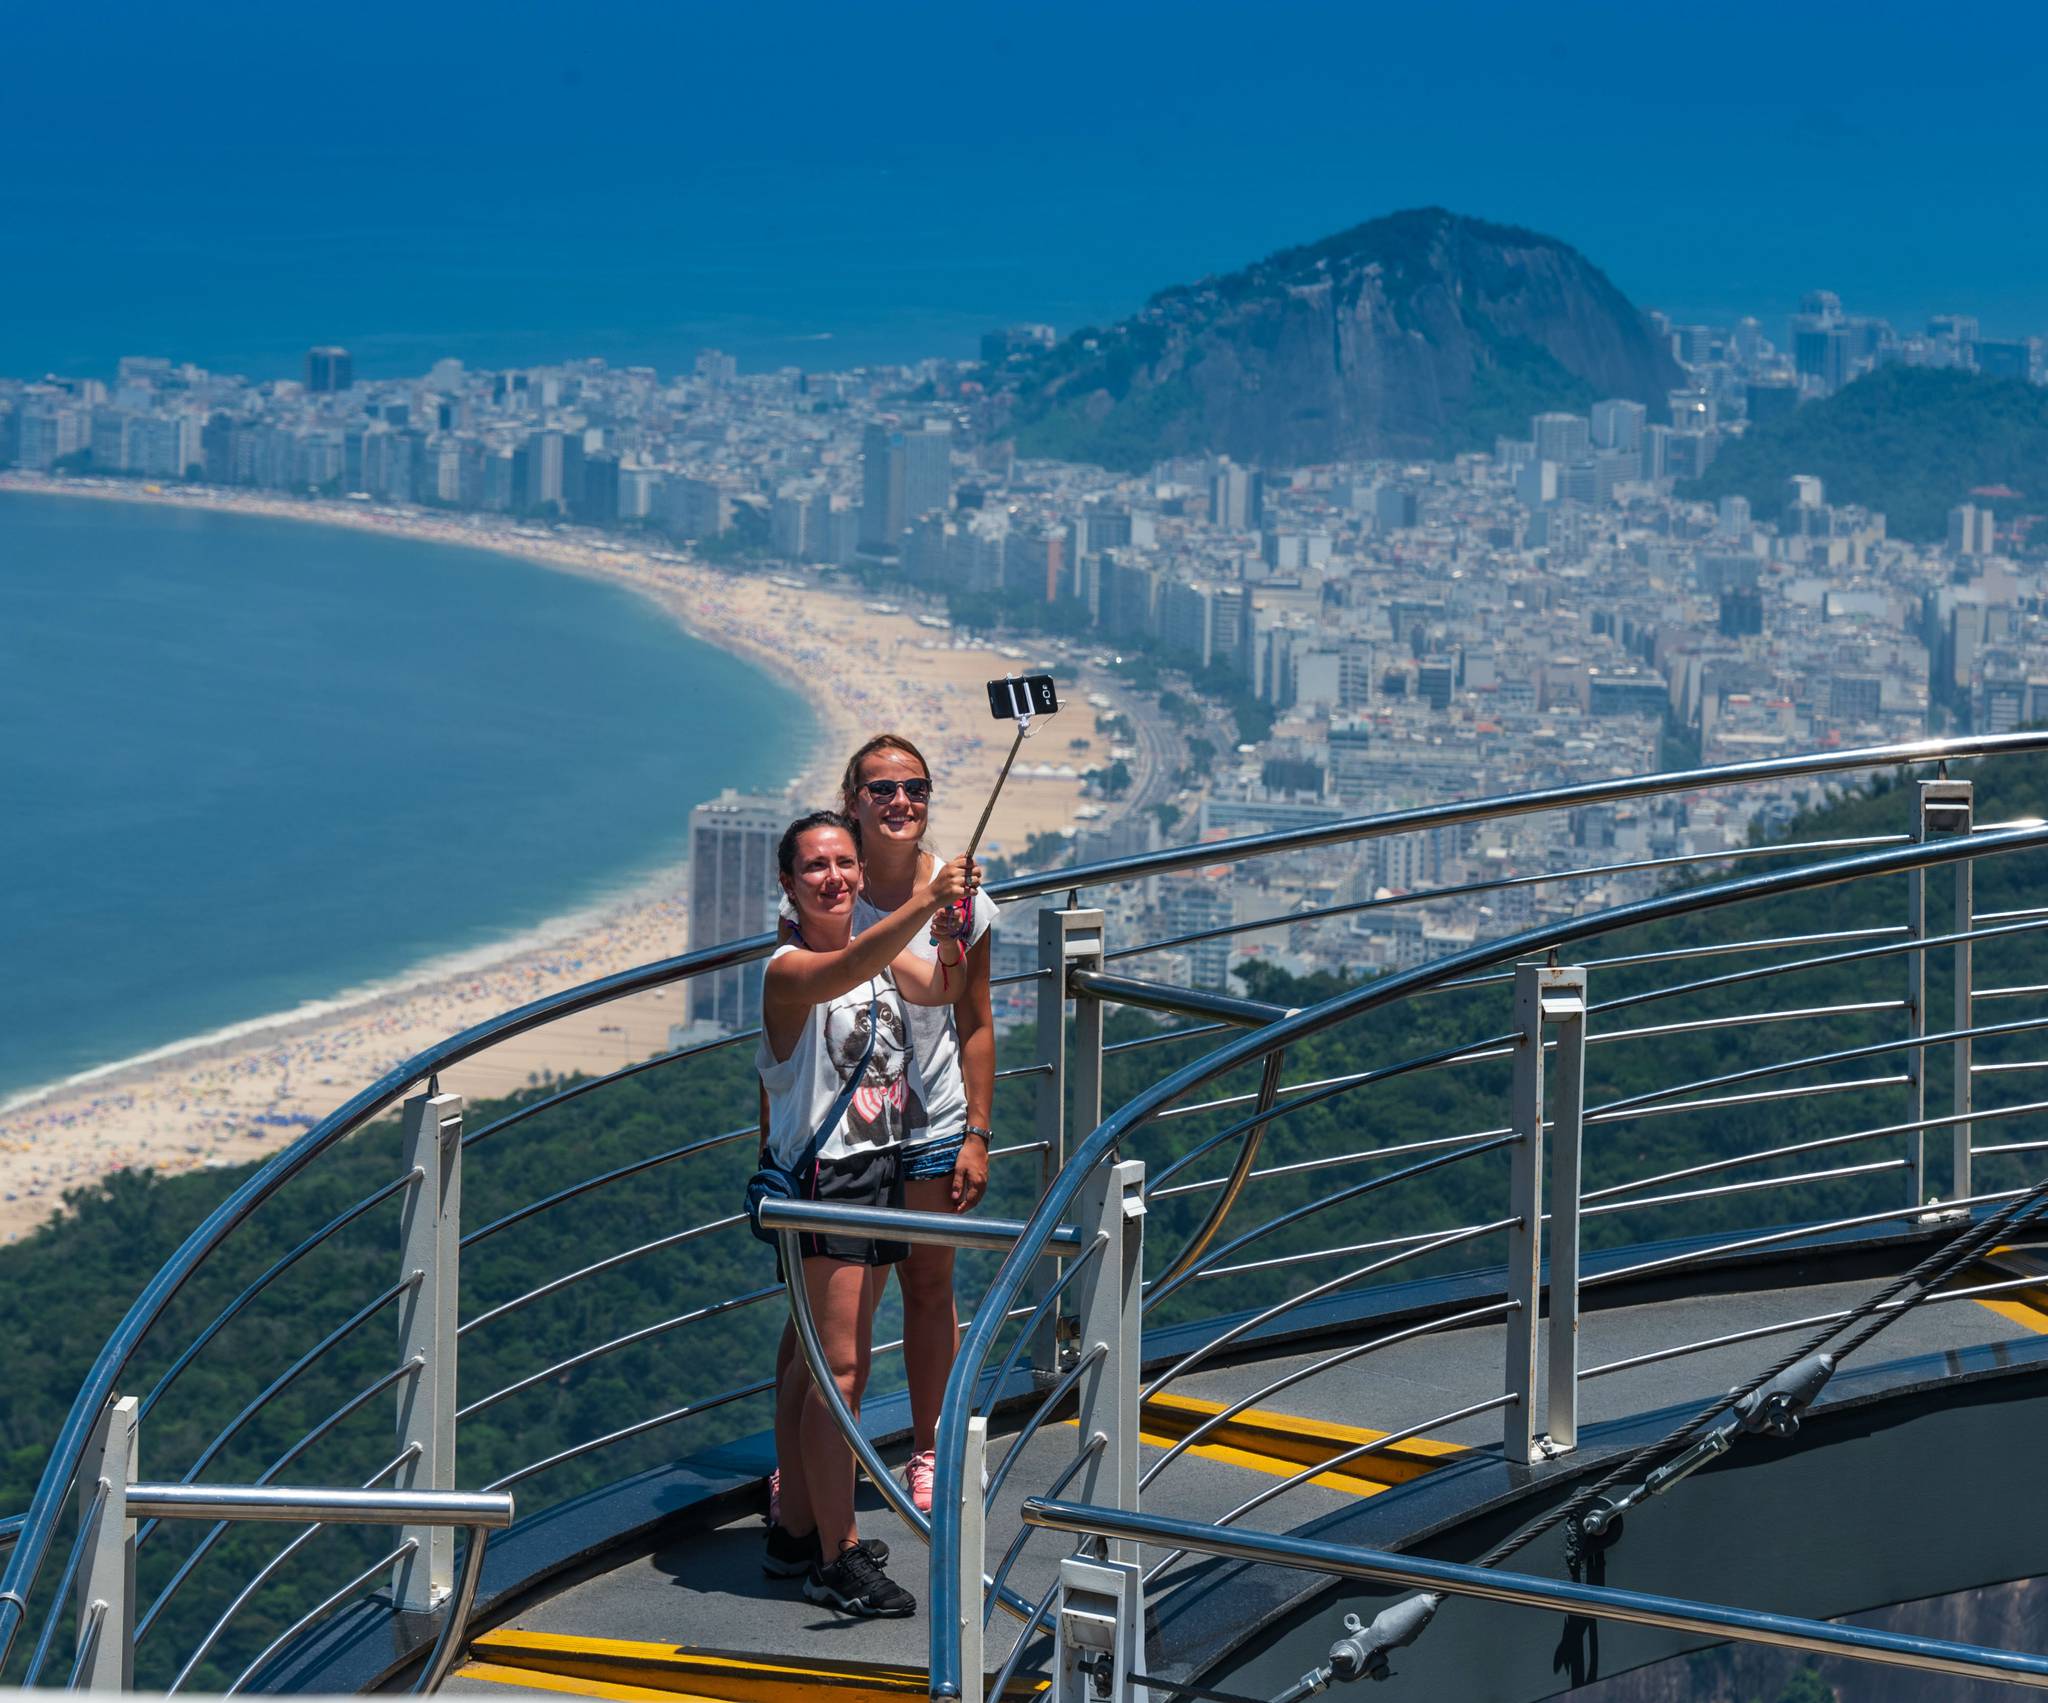 Brazil Tourism Board turns real people into influencers